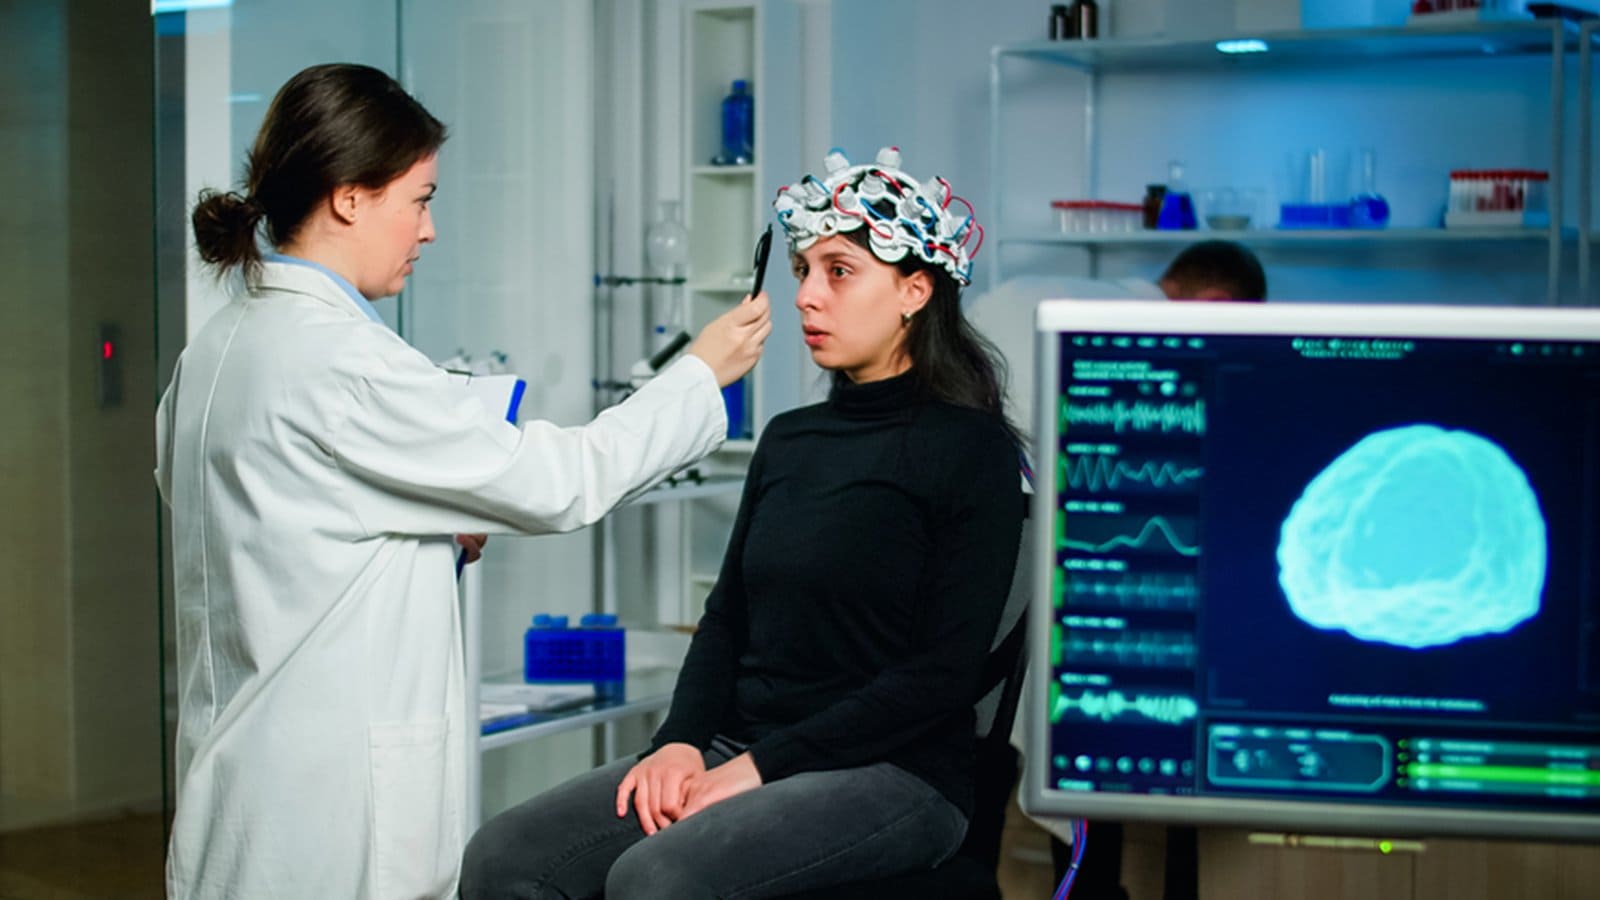 Medical worker preparing a girl patient for an in-office EEG